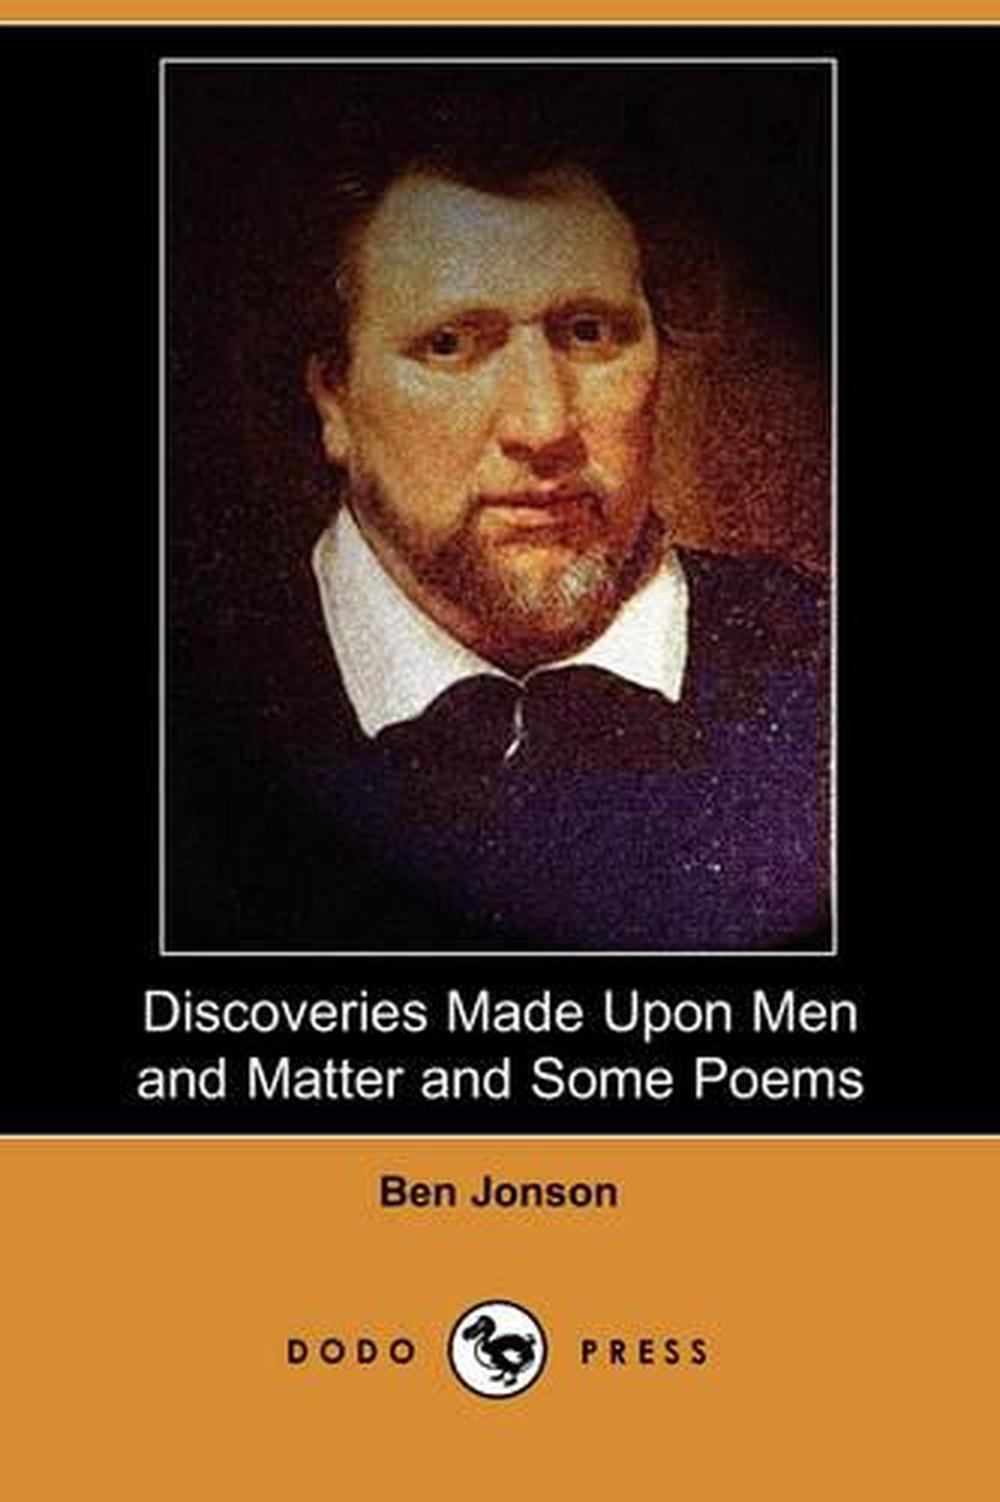 The Complete Poems by Ben Jonson